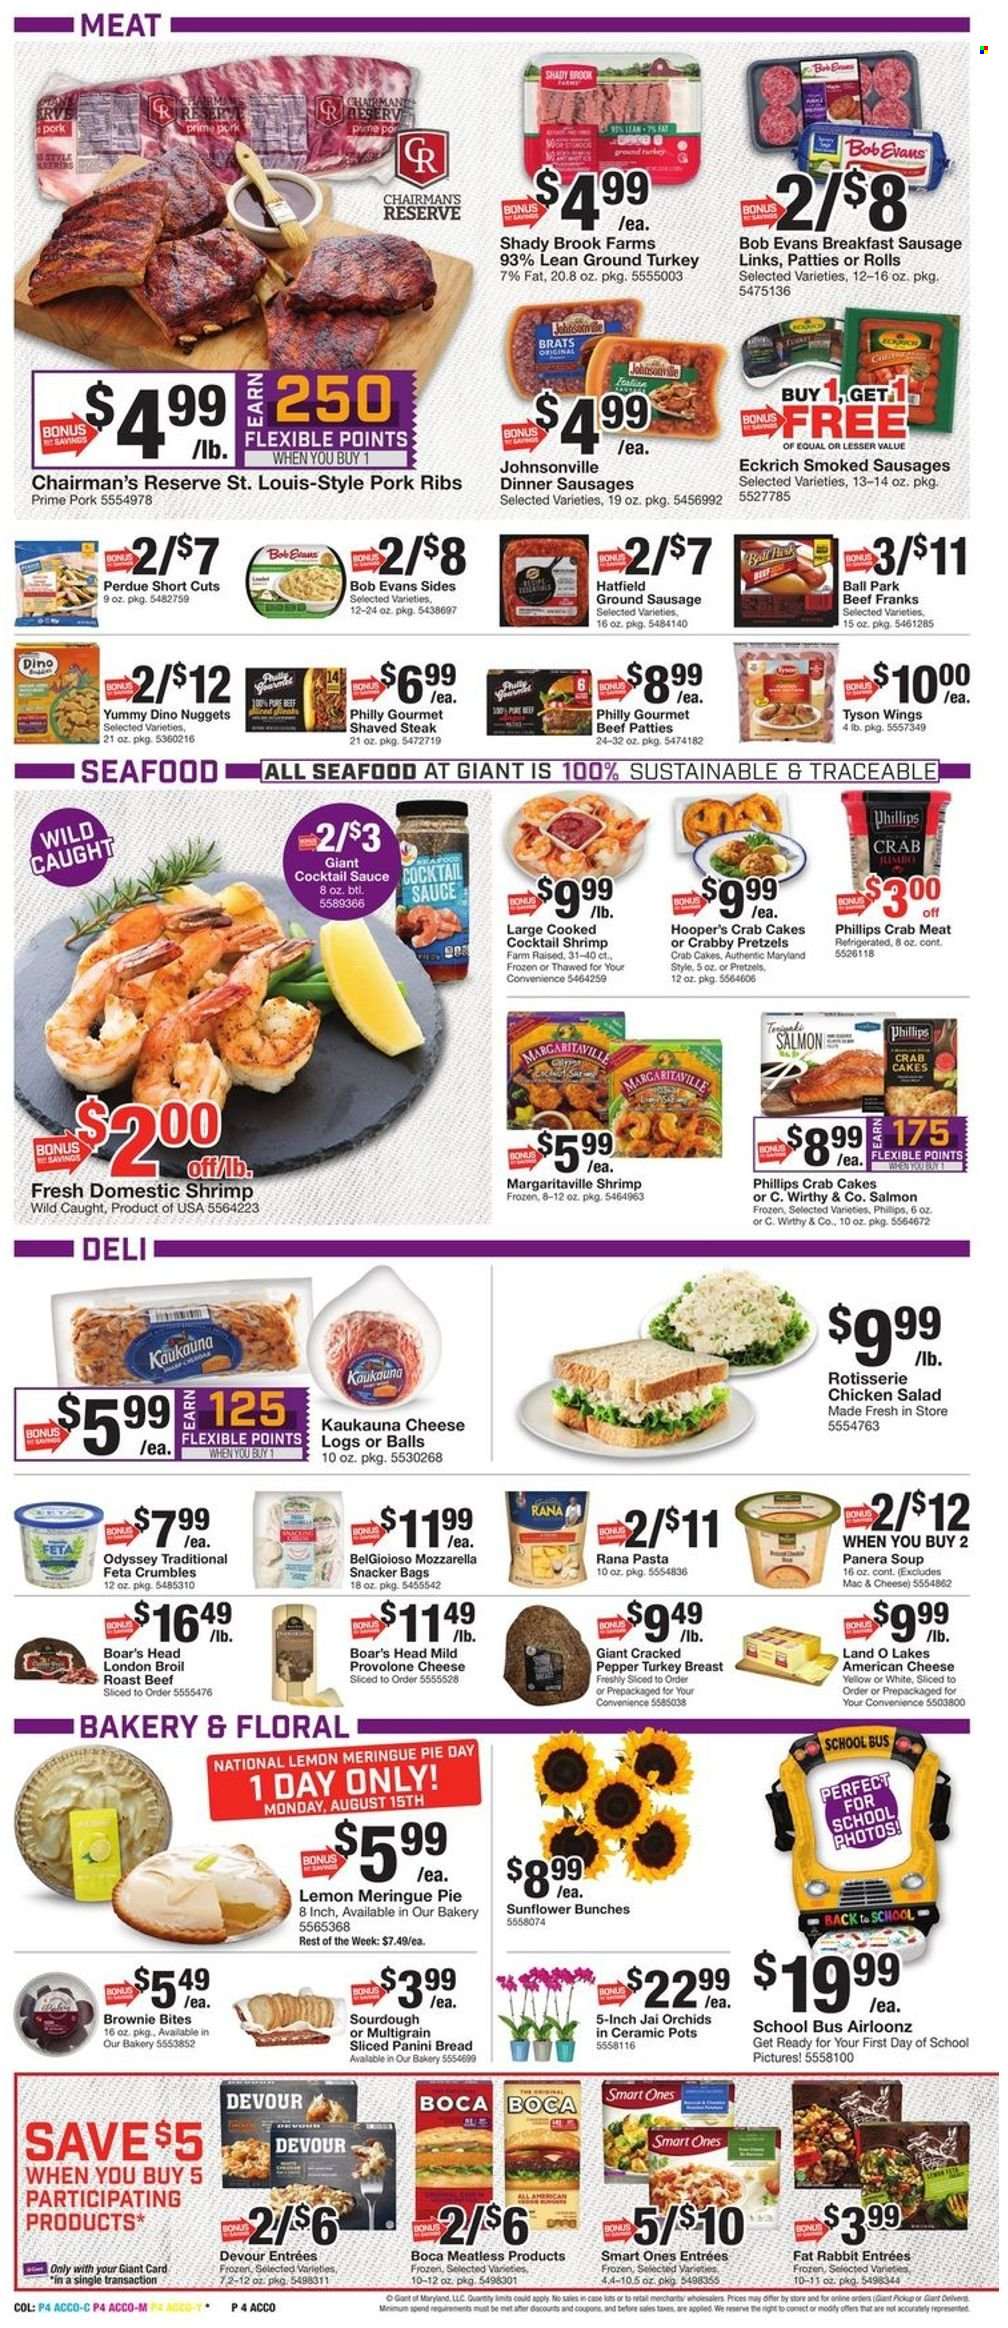 thumbnail - Giant Food Flyer - 08/12/2022 - 08/18/2022 - Sales products - pretzels, pie, panini, brownies, salad, crab meat, salmon, seafood, shrimps, crab cake, chicken roast, soup, nuggets, pasta, sauce, Perdue®, Bob Evans, Rana, Johnsonville, sausage, chicken salad, american cheese, mozzarella, feta, Provolone, Devour, cocktail sauce, ground turkey, turkey breast, beef meat, steak, roast beef, pork meat, pork ribs, bag, pot, bunches, sunflower. Page 4.